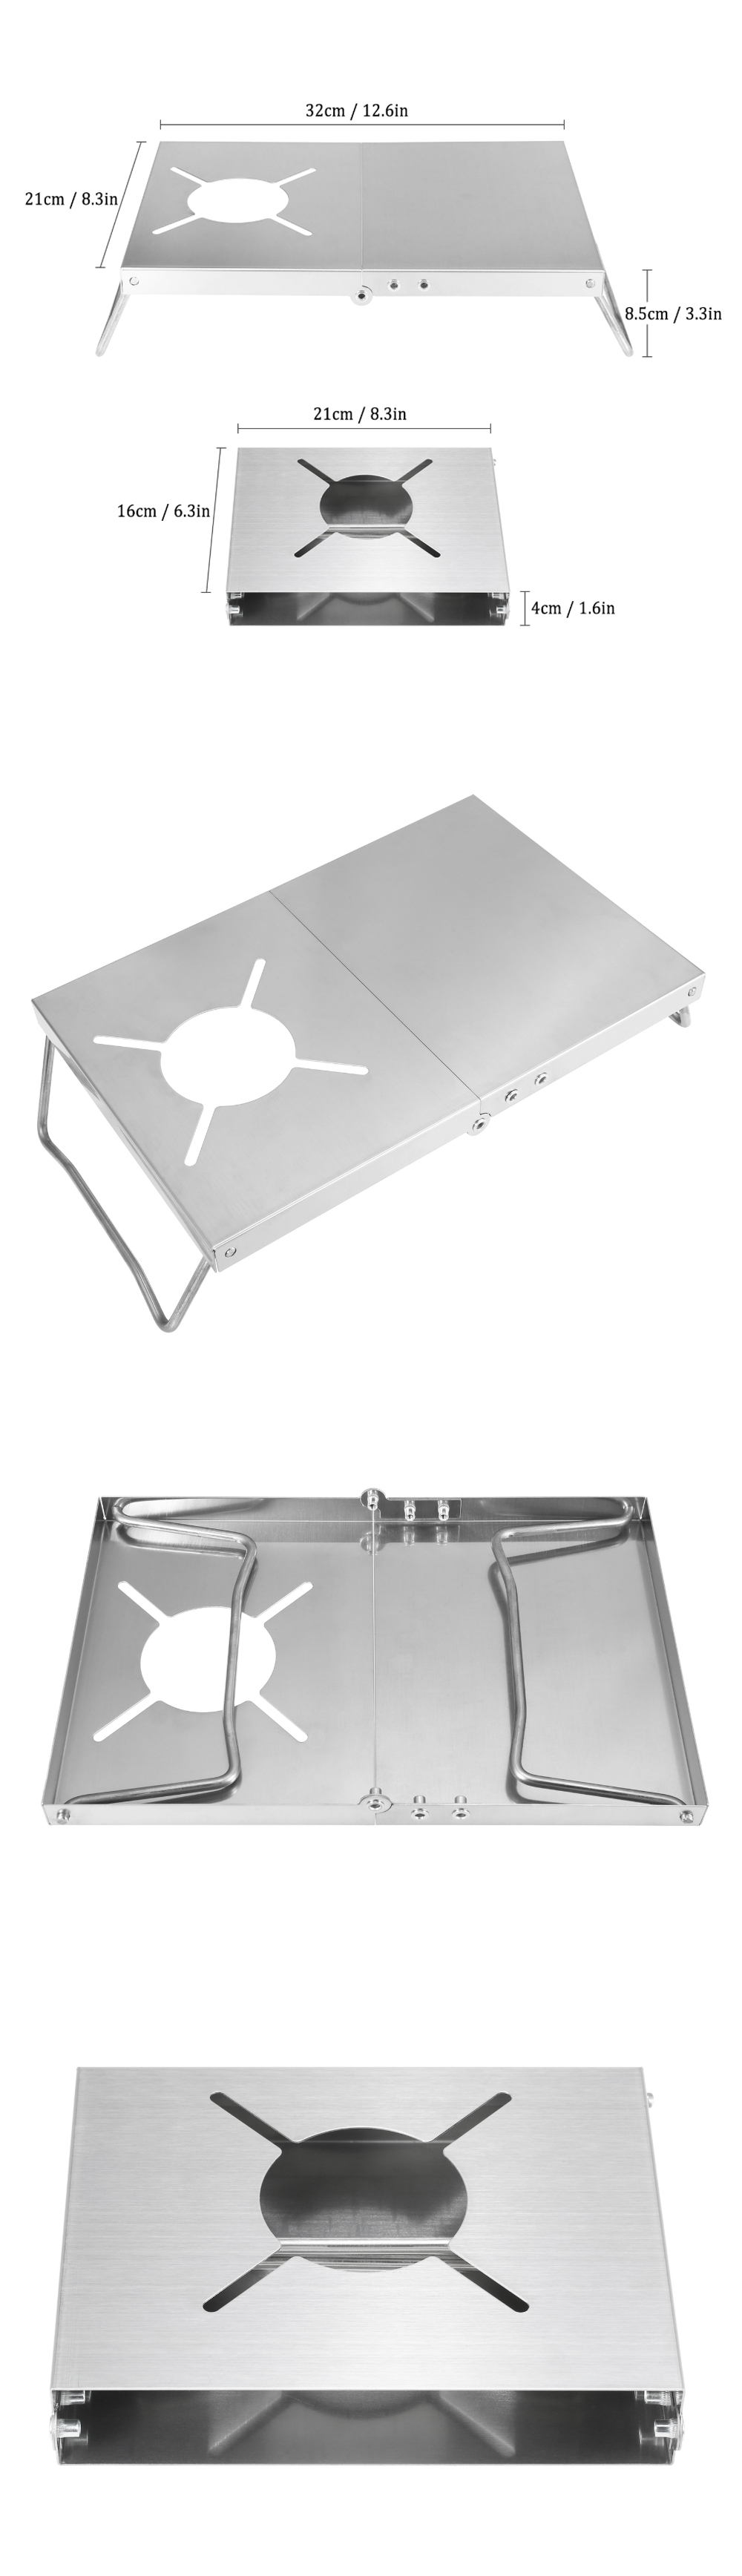 IPReereg-Stainless-Steel-Camping-Stove-Bracket-Heat-Insulation-Table-Gas-Furnace-Folding-Cooker-Tabl-1843839-2